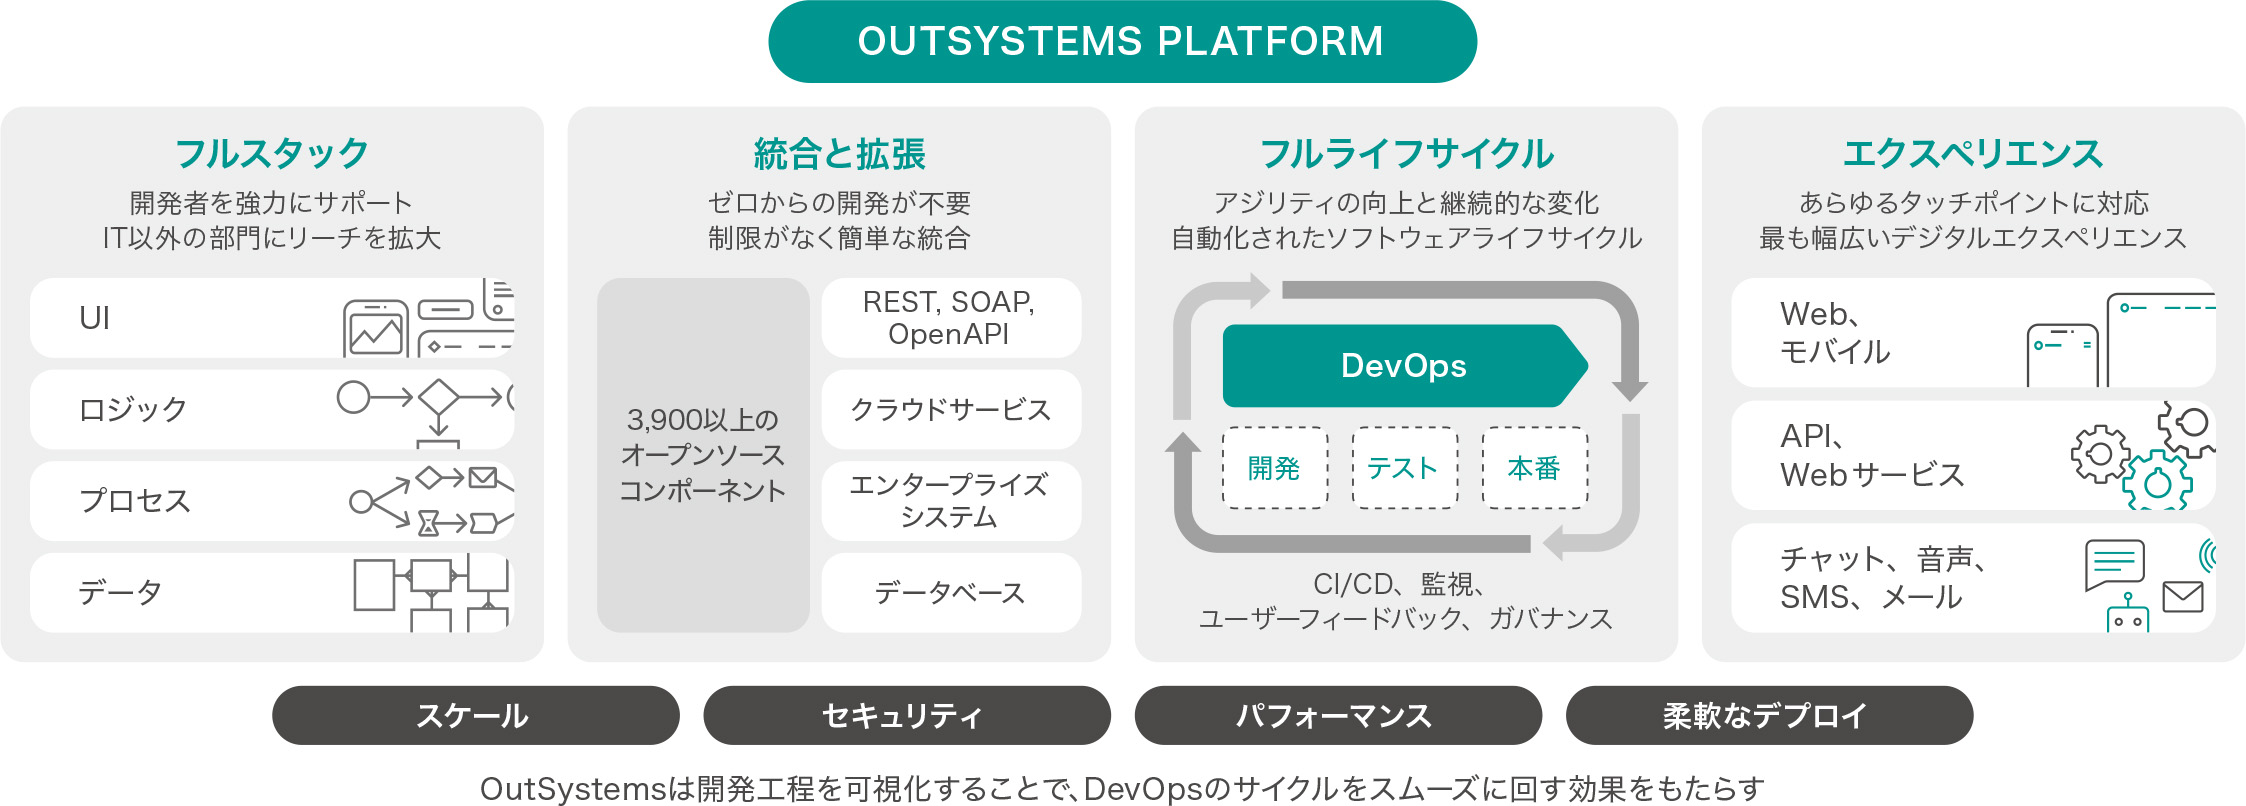 OutSystemsの主な機能特長